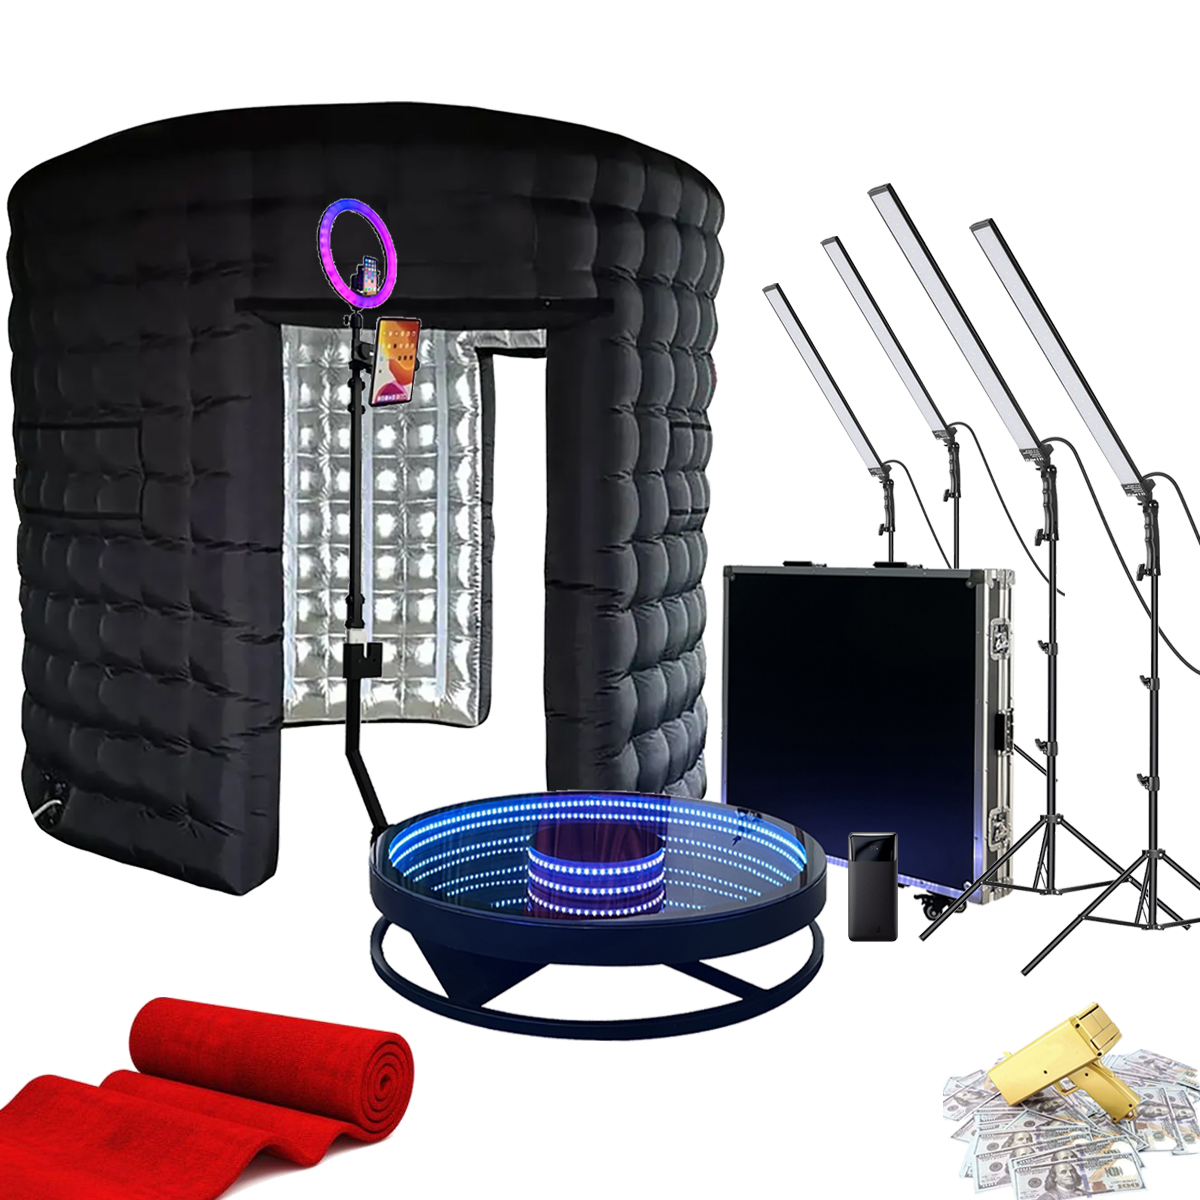 LED 360 Photo Booth Deluxe Package 1 - Green Screen & LED Up Lighting Packages | SnapShotDj -